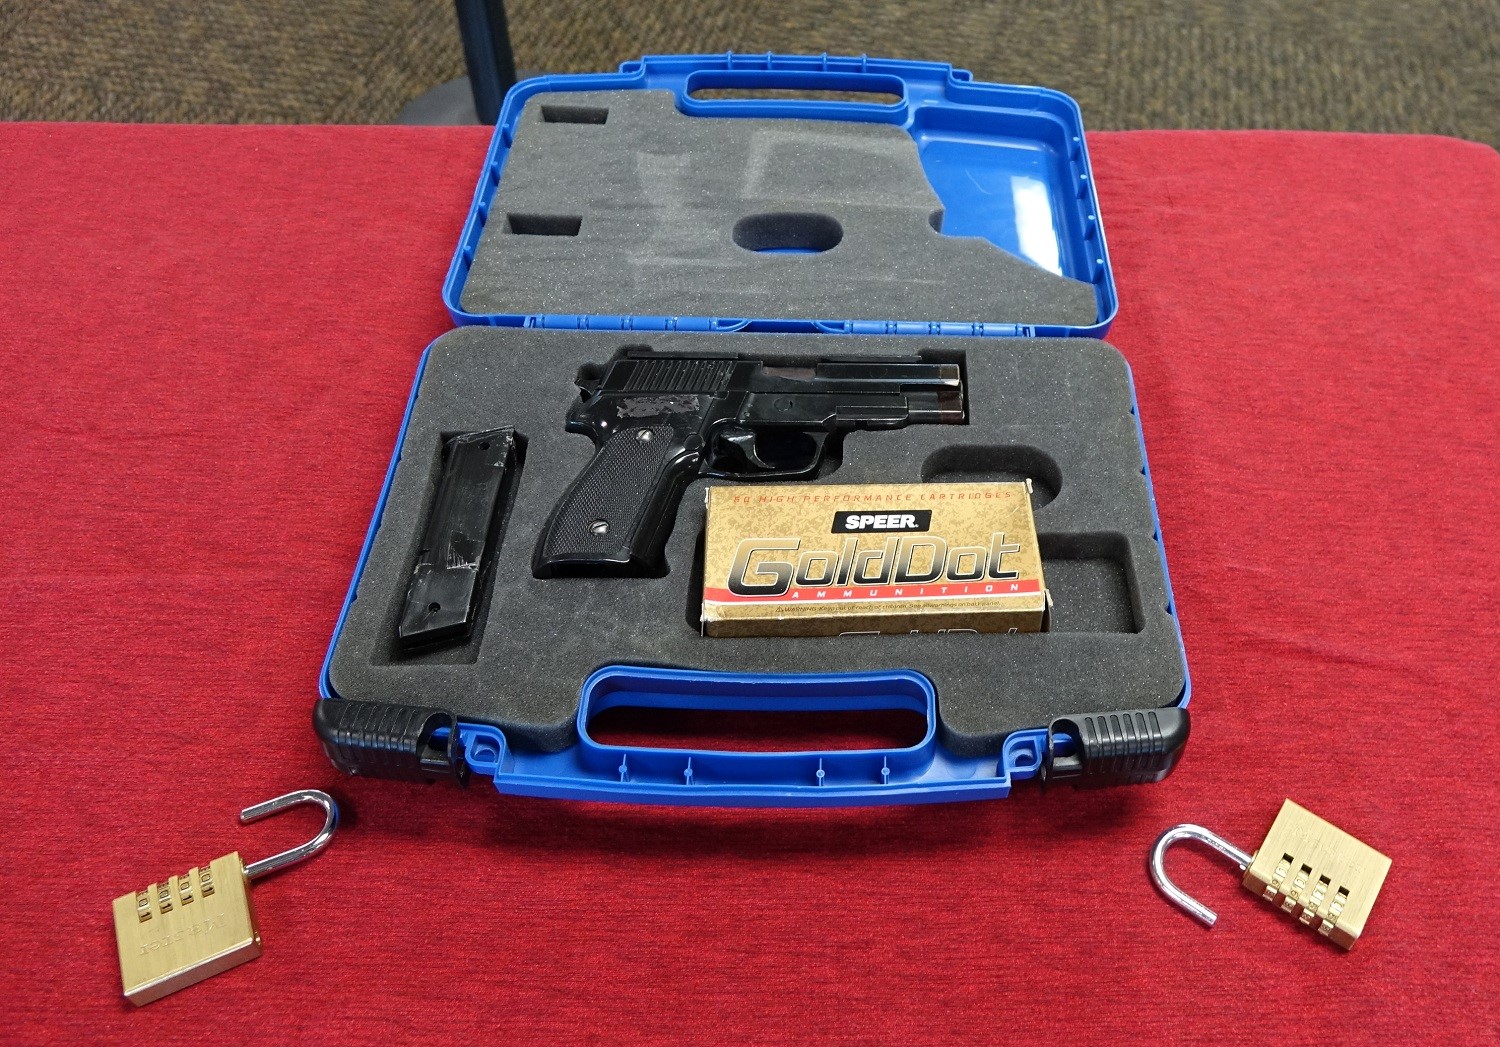 Handgun packed for travel on a commercial aircraft